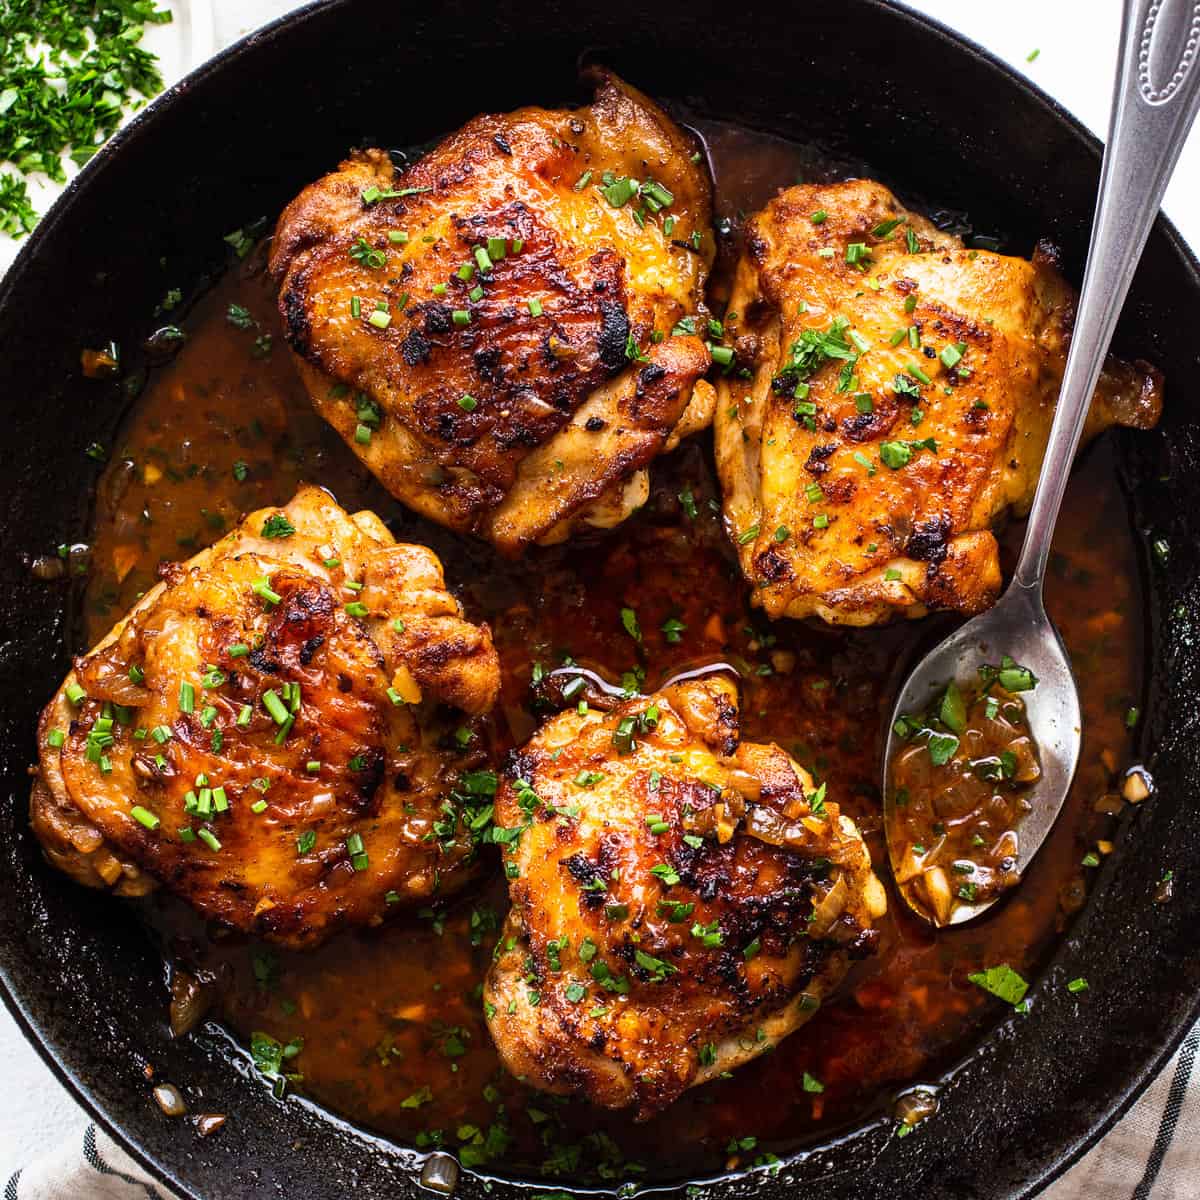 https://fitfoodiefinds.com/wp-content/uploads/2023/05/Cast-Iron-Chicken-Thighs-sq.jpg